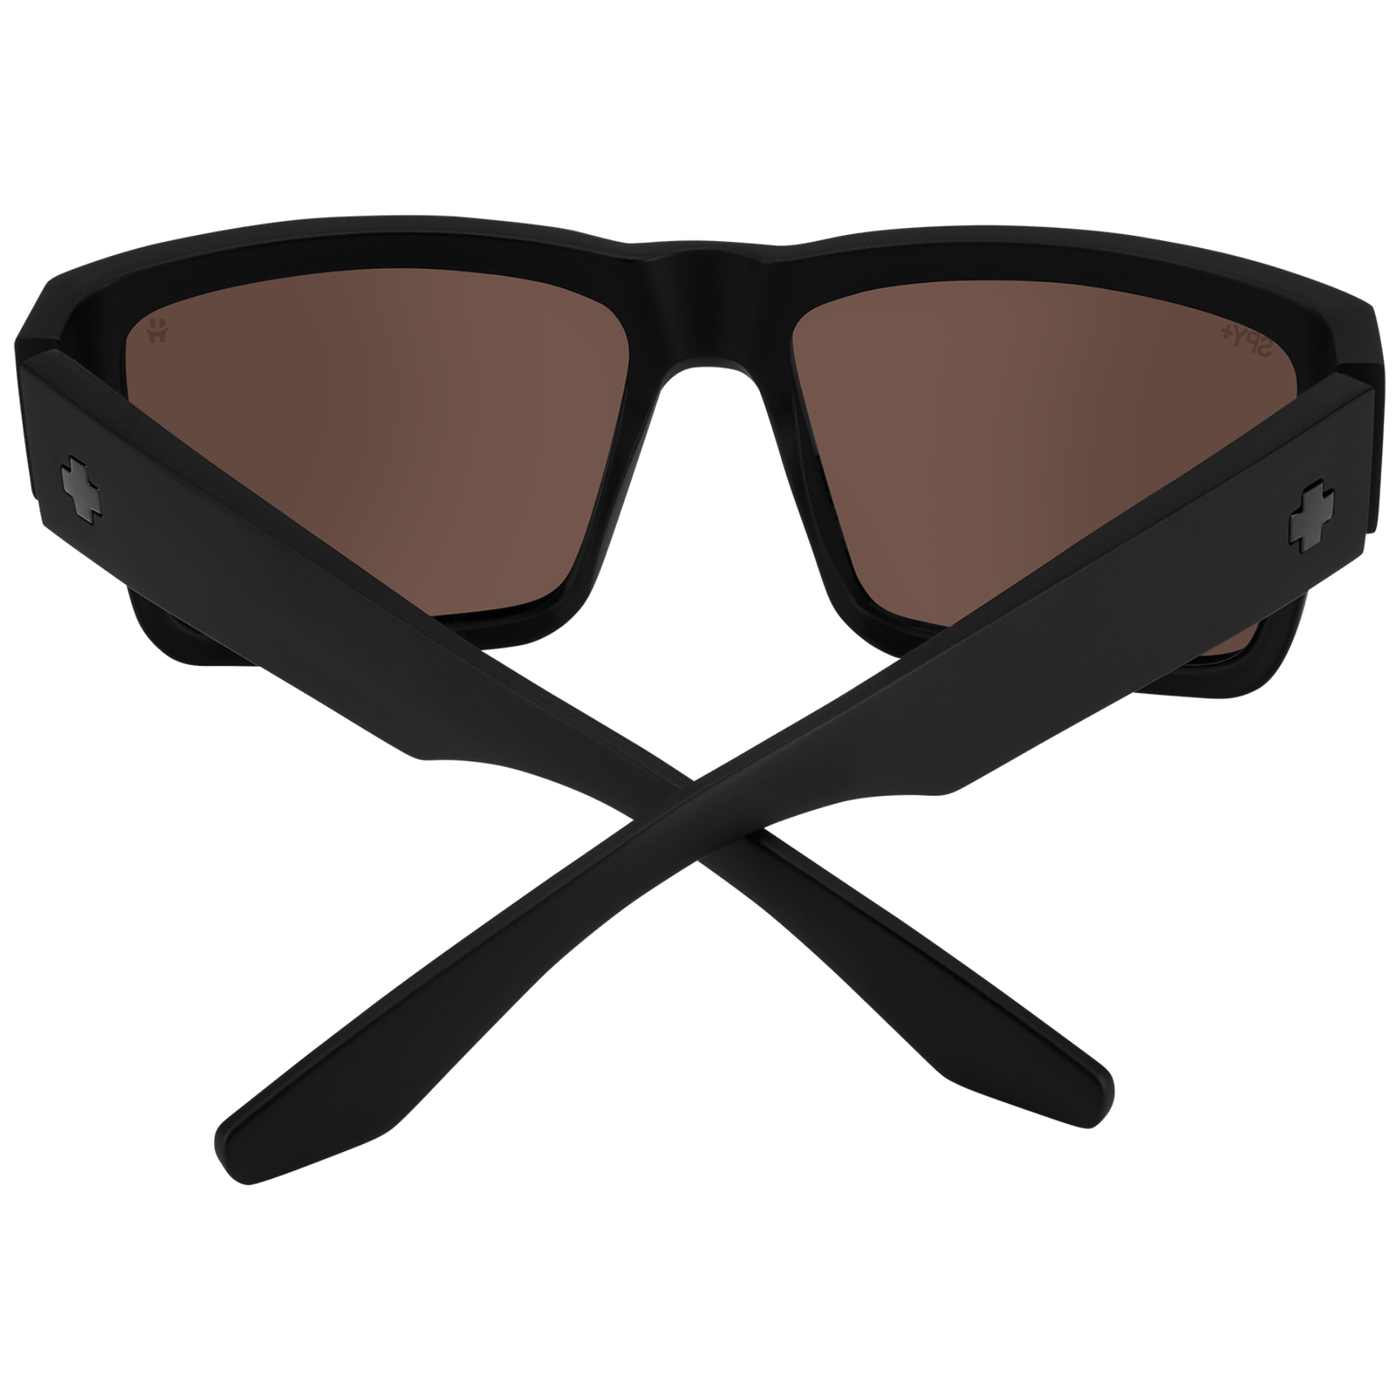 cyrus sunglasses for men and women